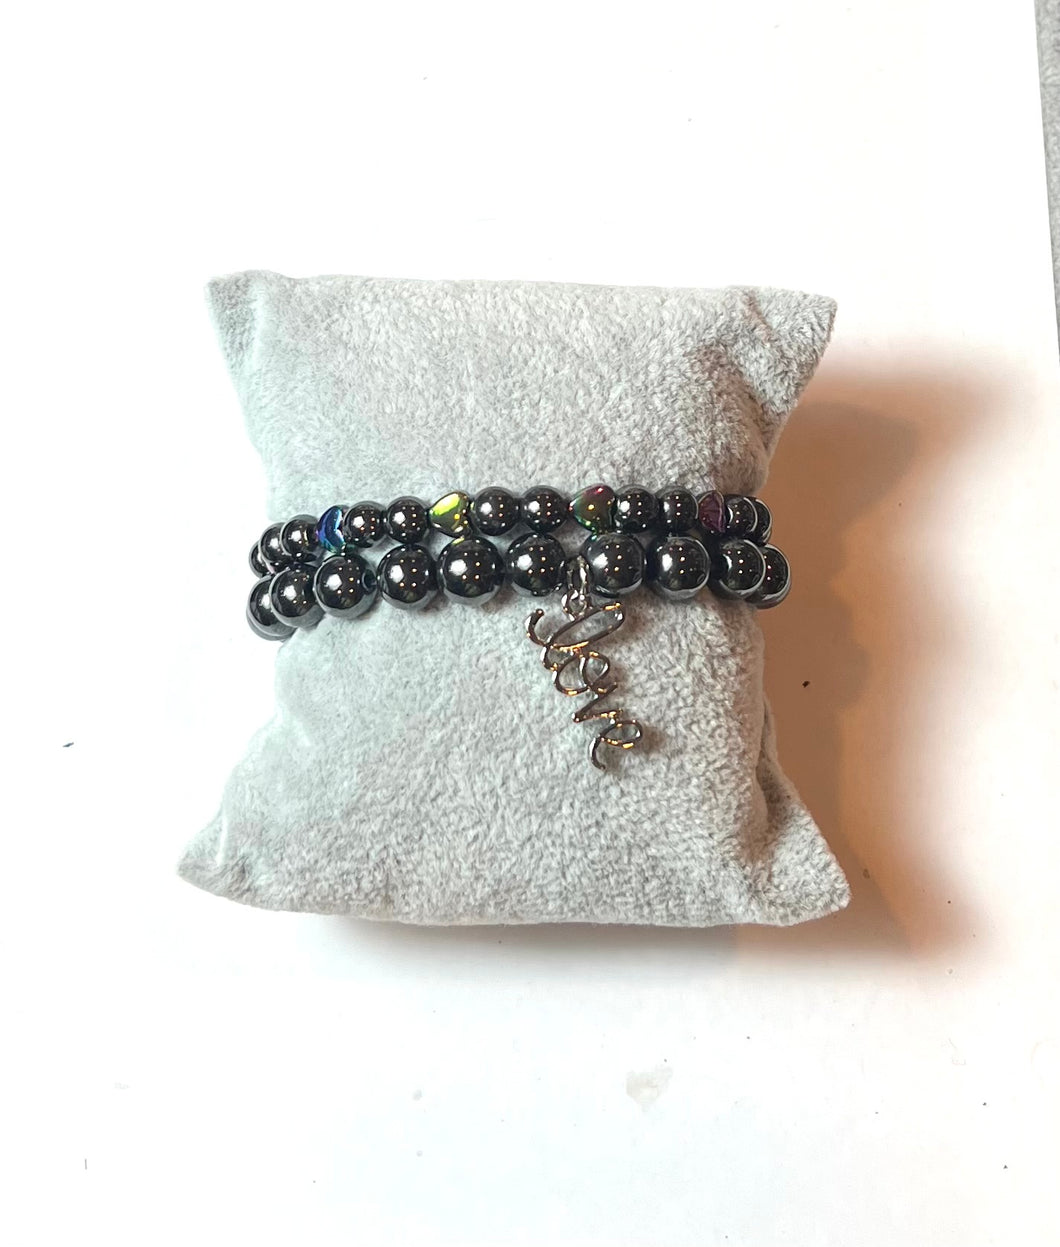 L&J COLLECTION BRACELET SET: HEMATITE BEADS W LOVE AND HEARTS